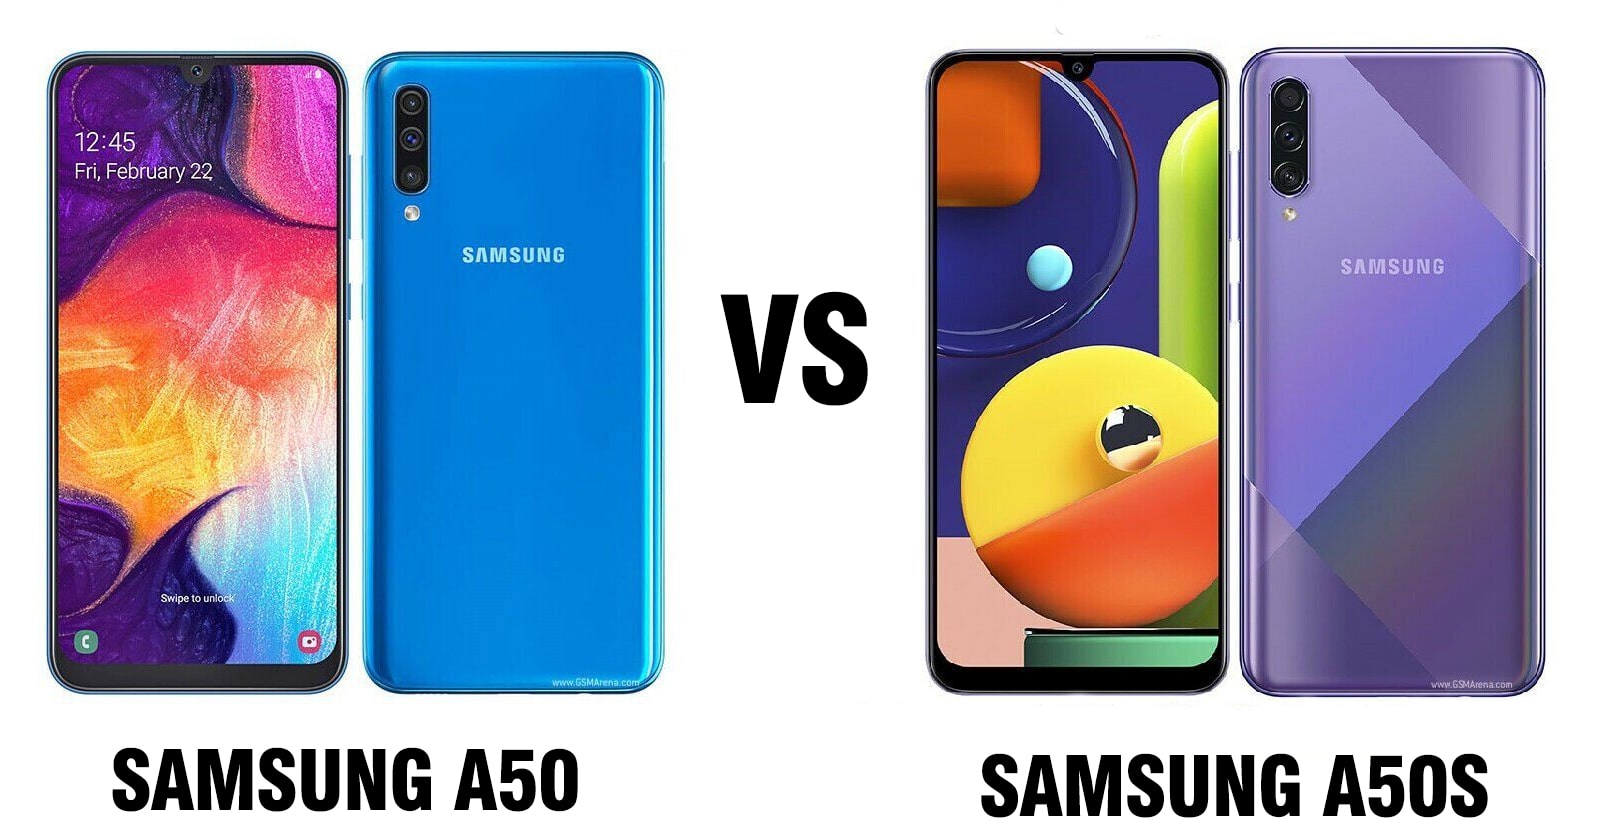 What Is the Difference Between Samsung A50 and A50s